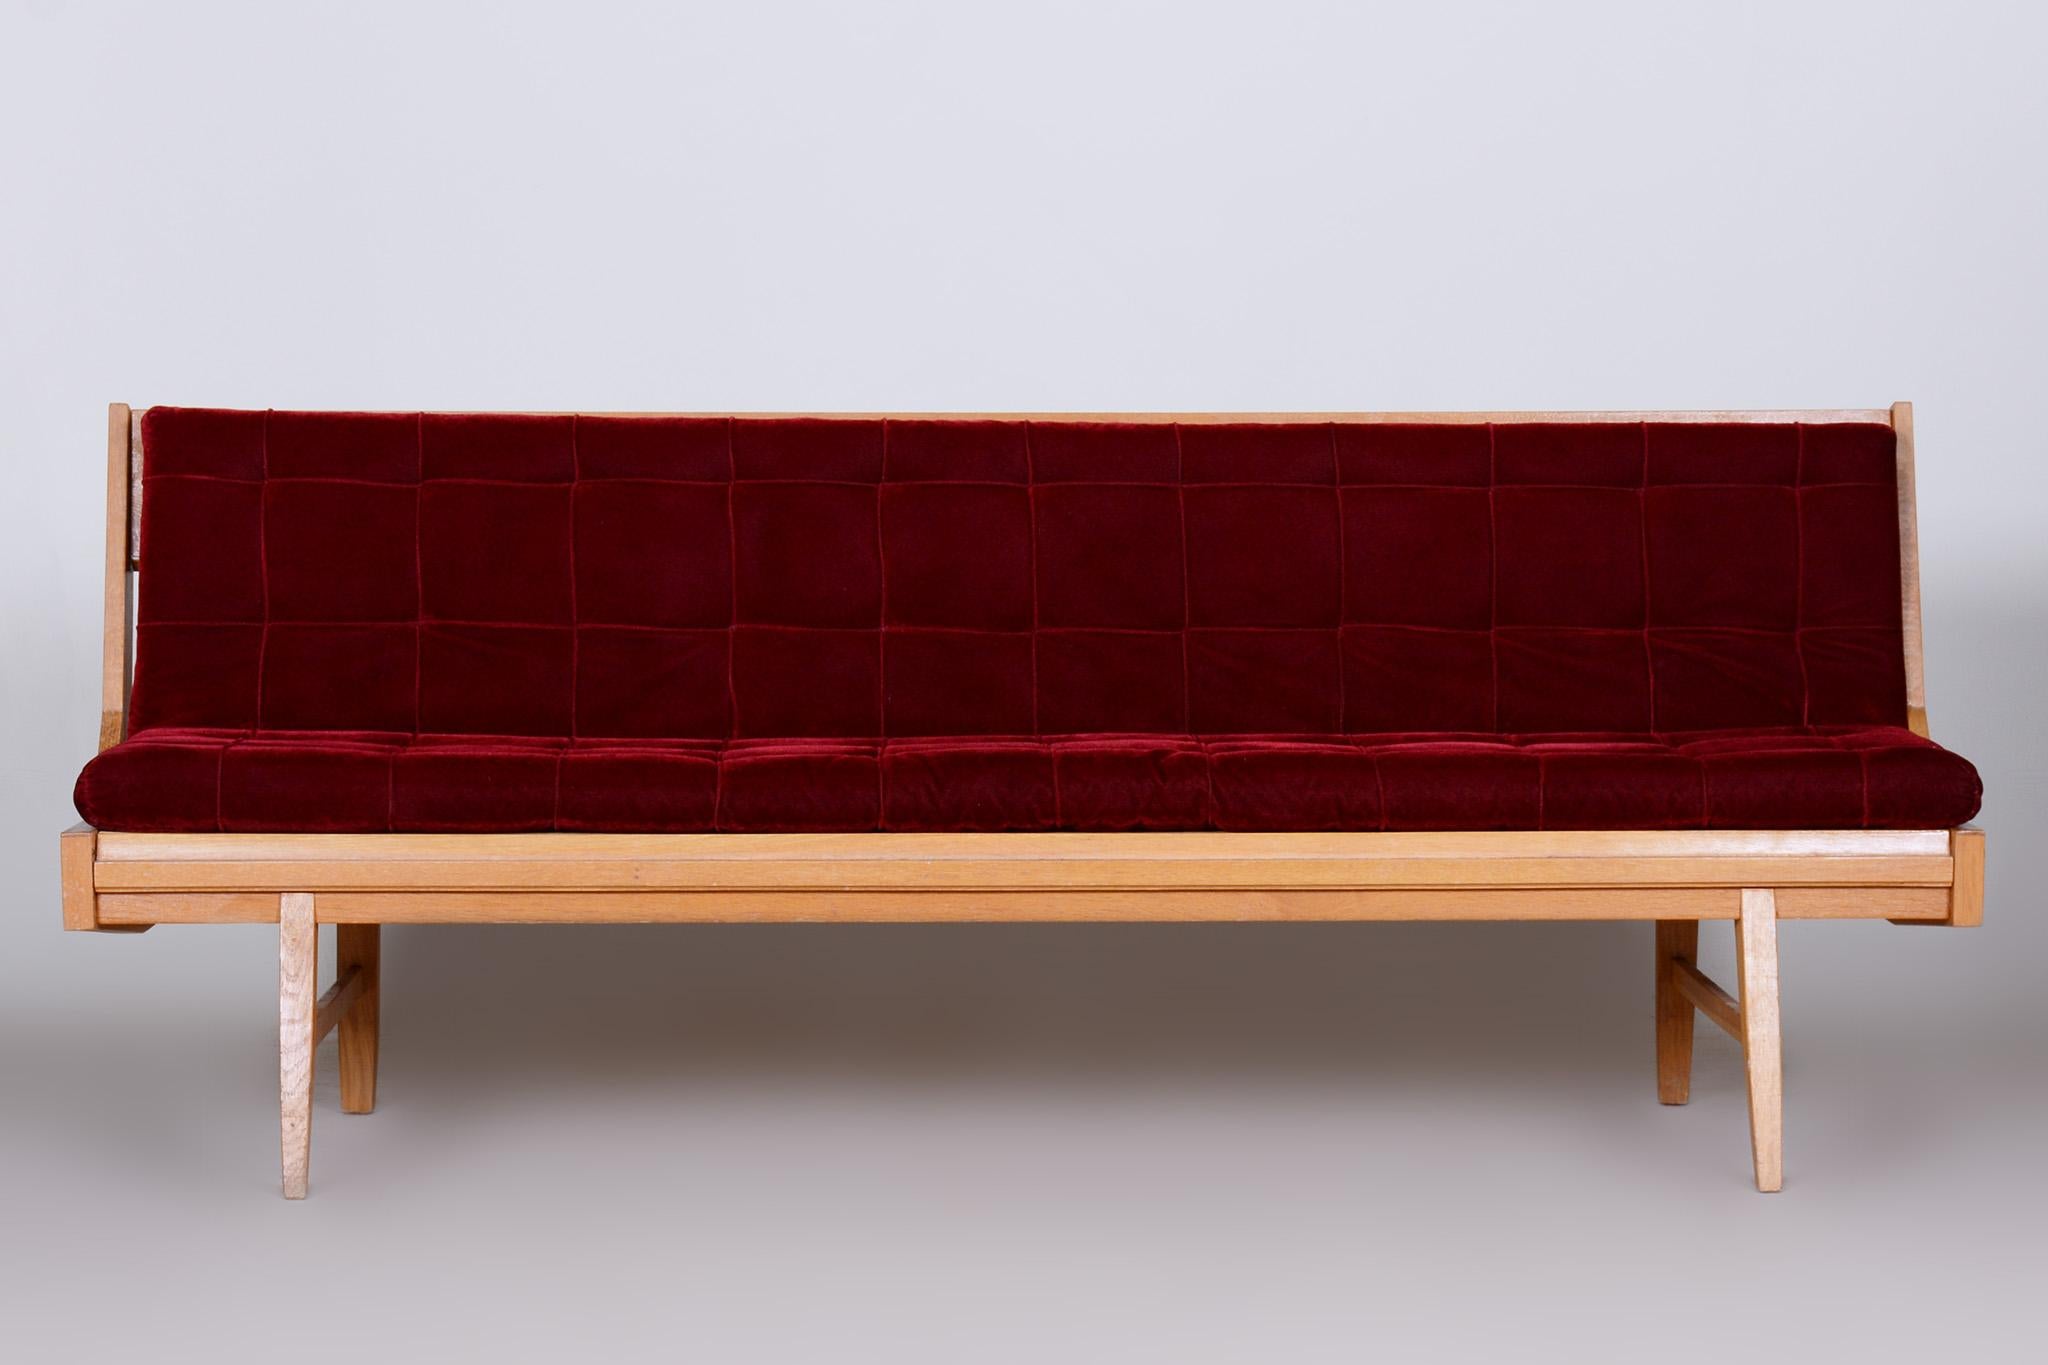 Red Mid-Century Modern Oak Sofa, 1950s, Original Well Preserved Upholstery In Good Condition For Sale In Horomerice, CZ